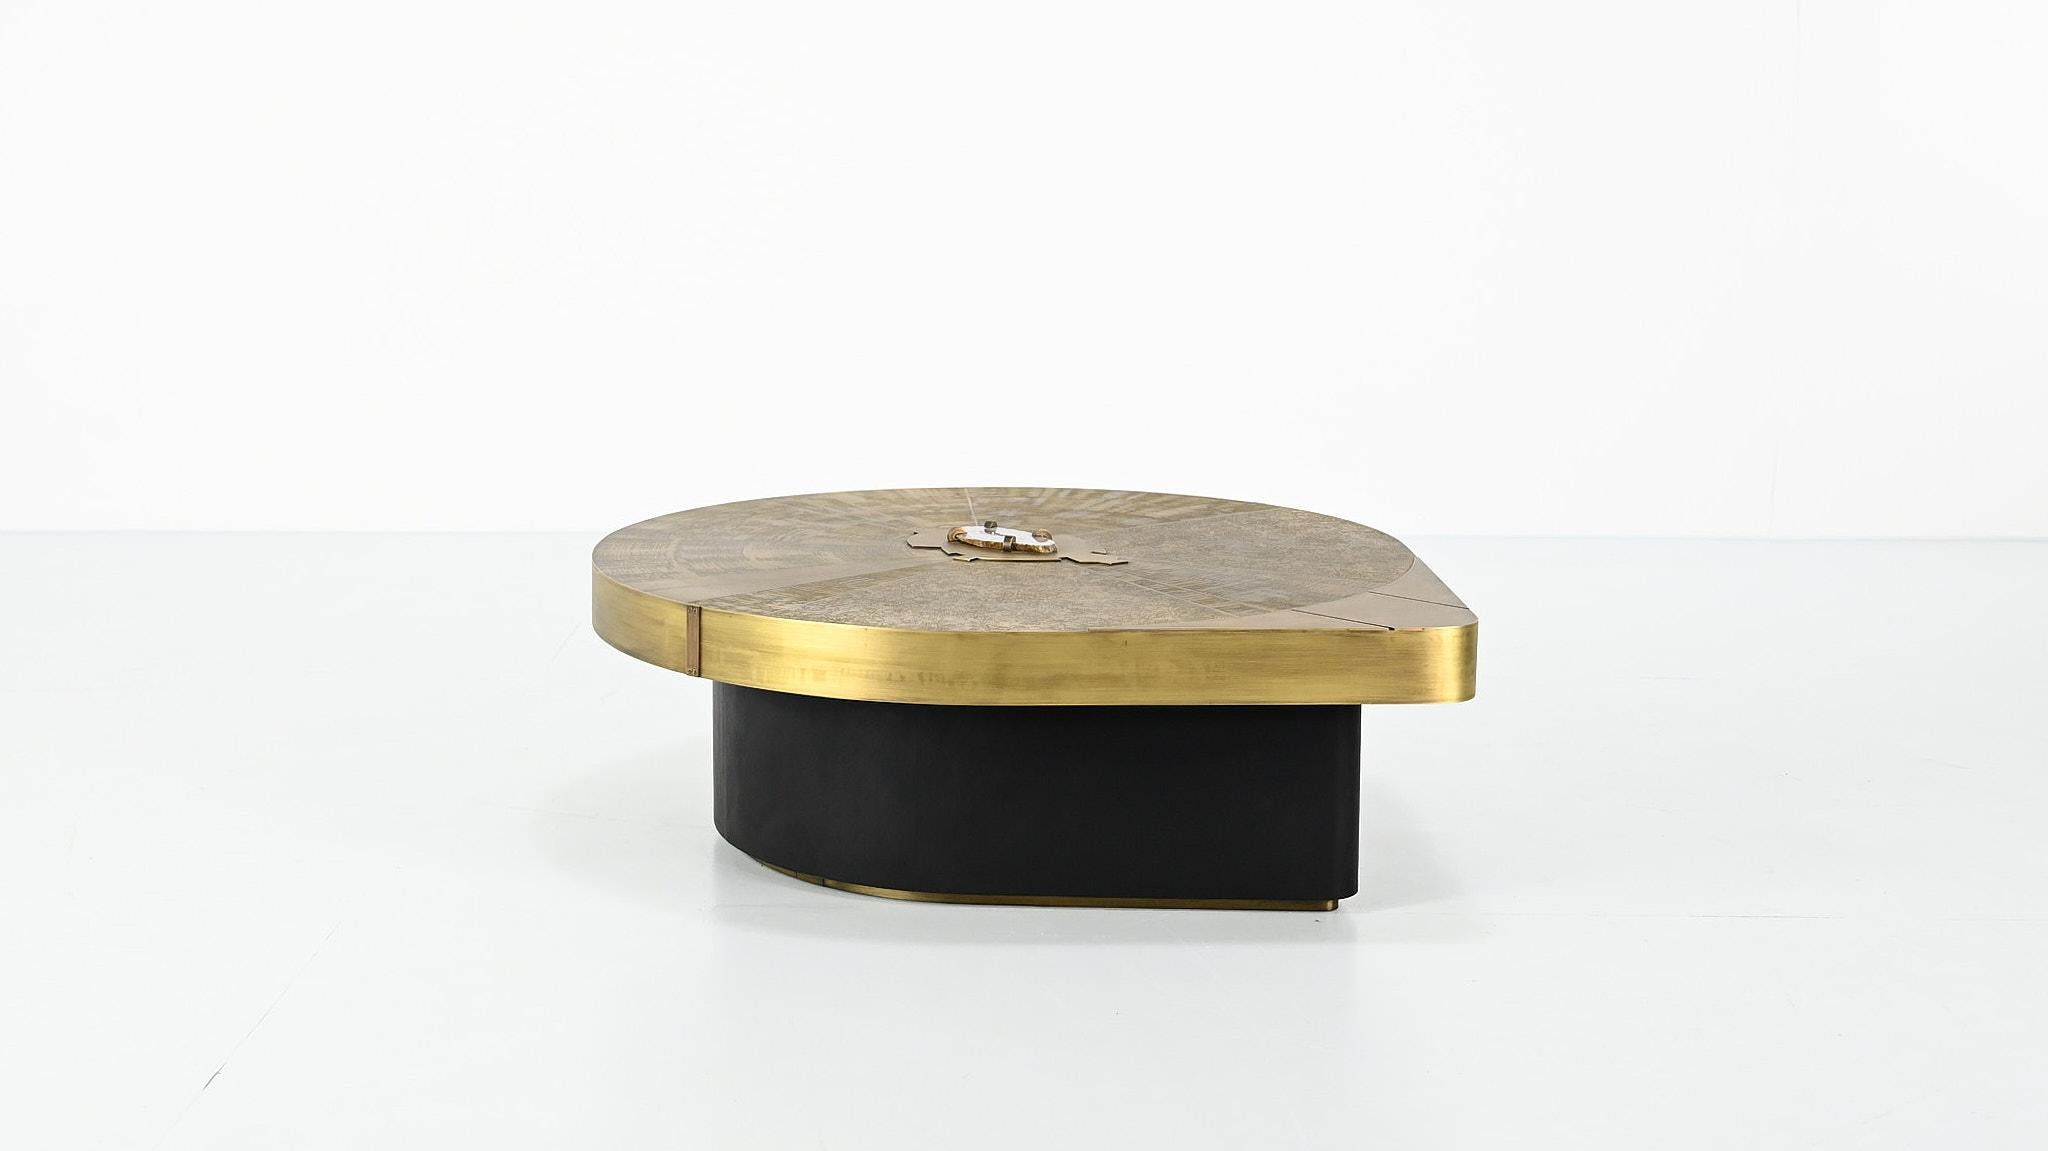 Freeform acid etched brass and agate stone coffee table 8